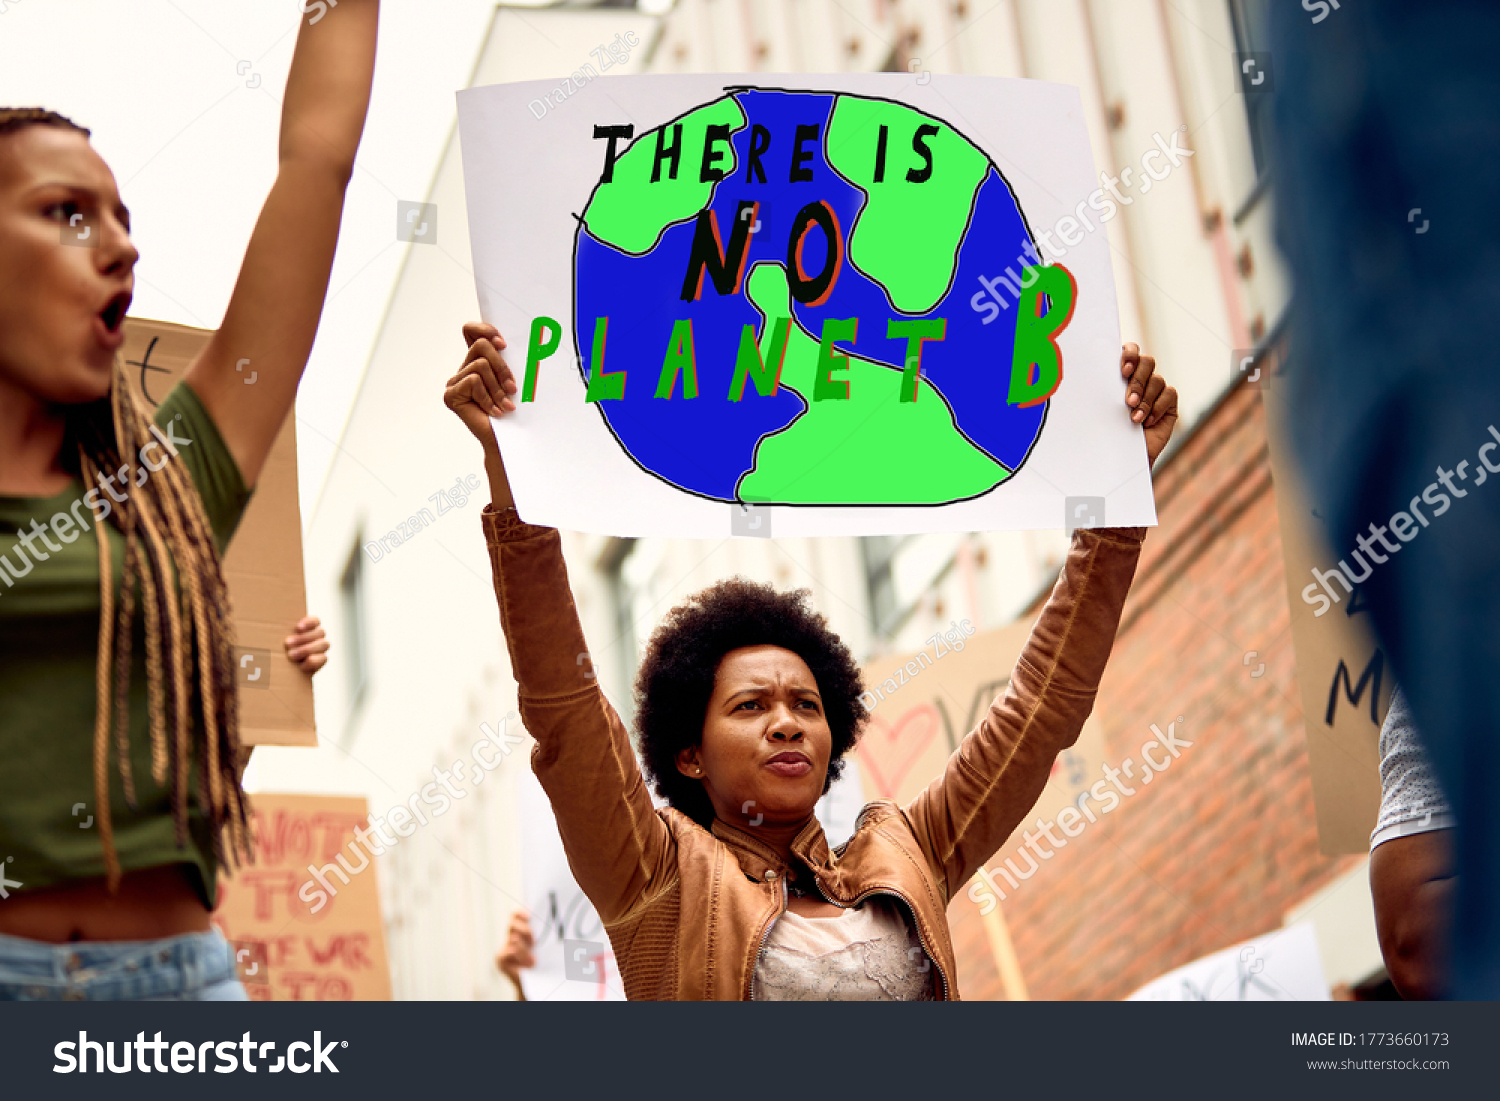 Low angle view of African American woman carrying banner with there is no planet B inscription while protesting with crowd of activists against climate changes. #1773660173